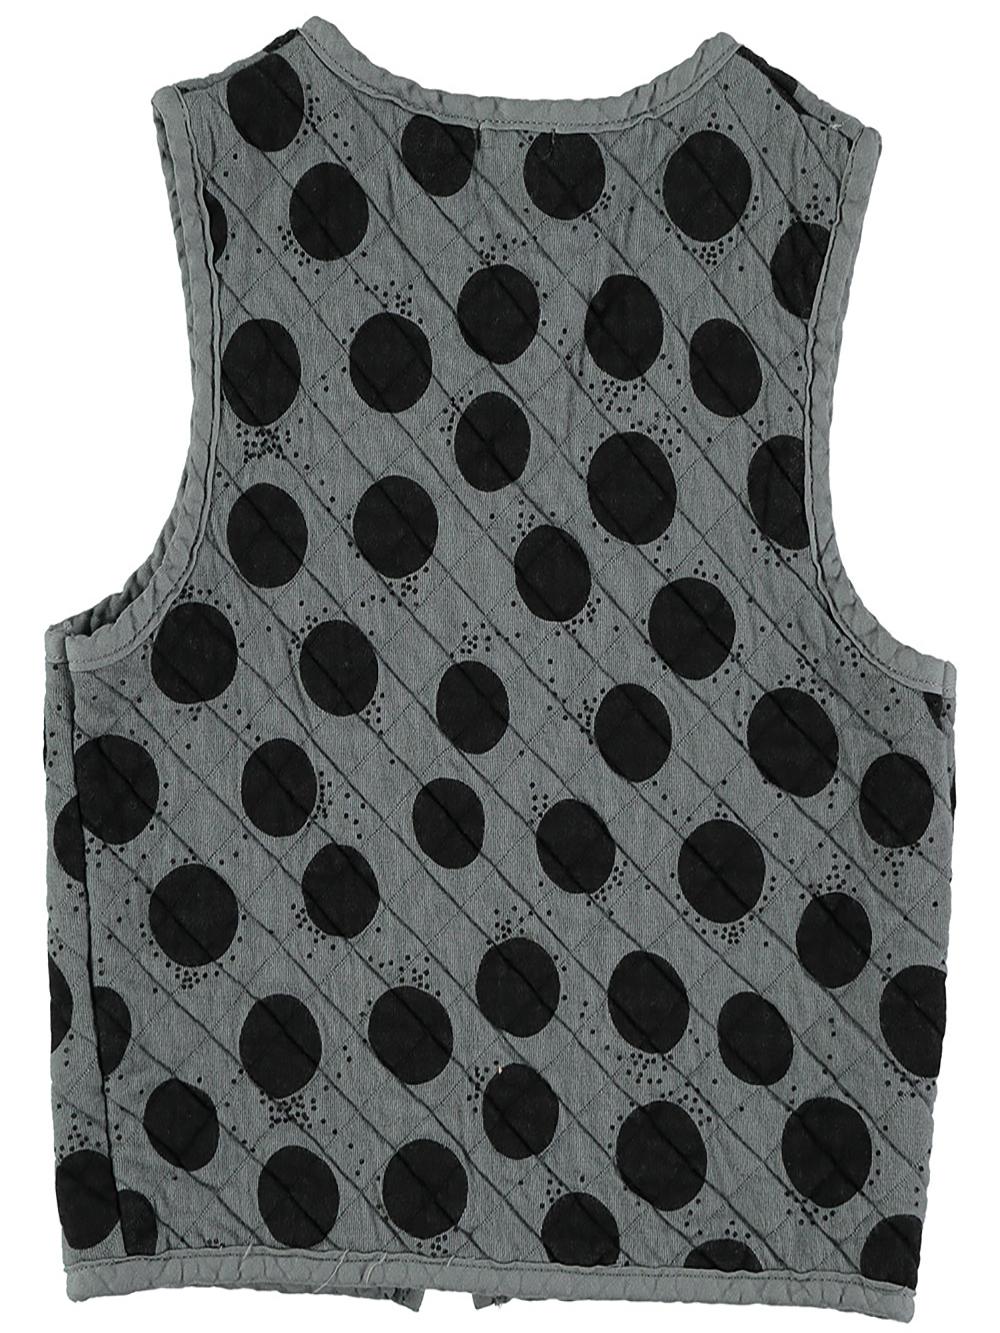 GRAY QUILTED VEST WITH BLACK DOTS